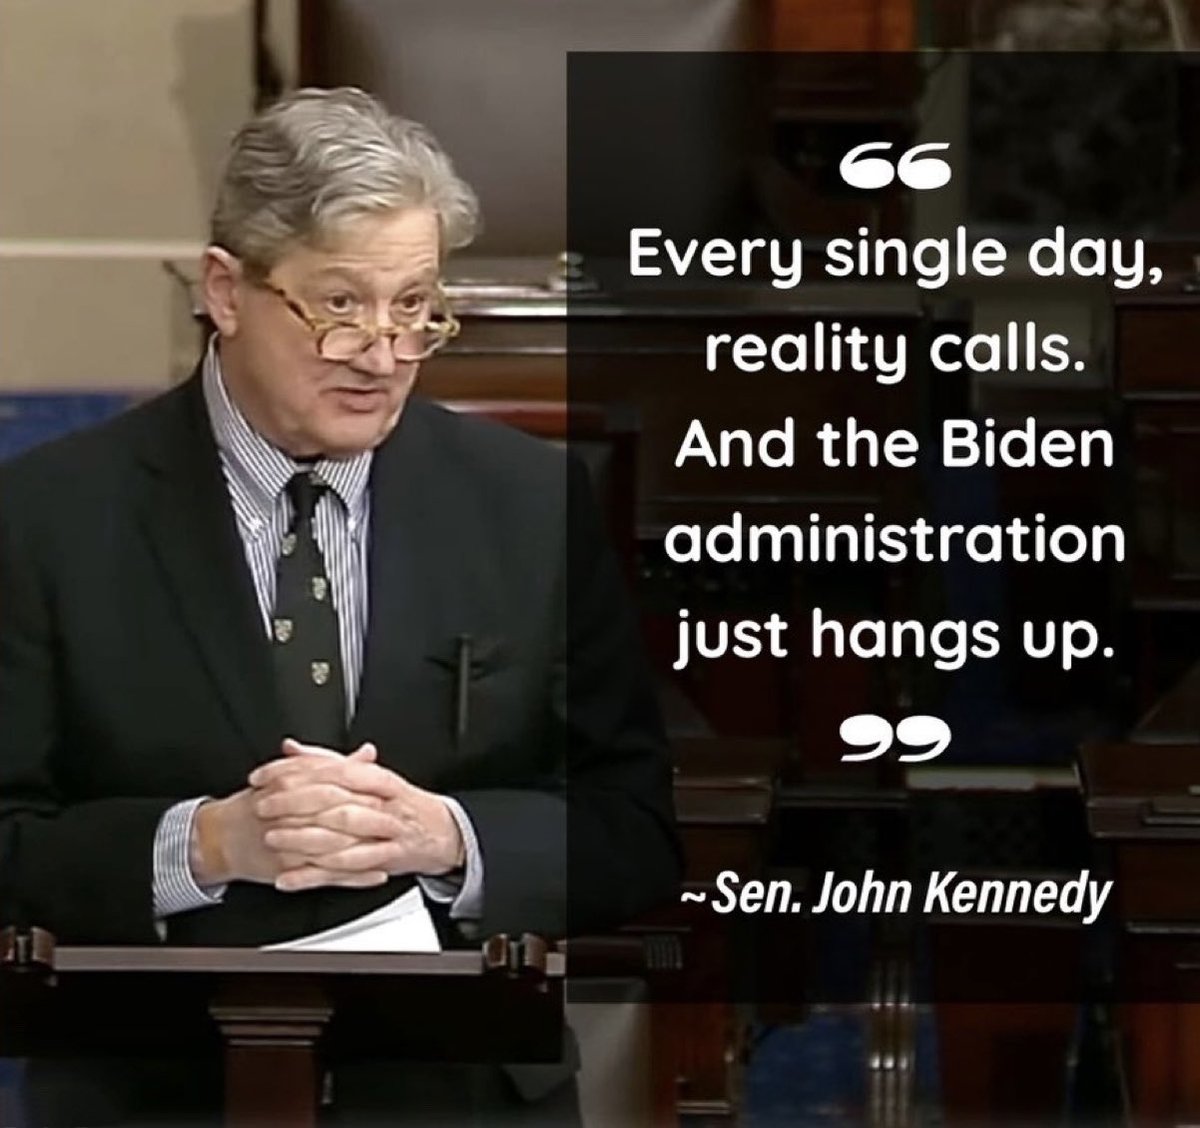 This current administration is totally out of touch with reality! Share if you agree with Sen. John Kennedy 🇺🇸